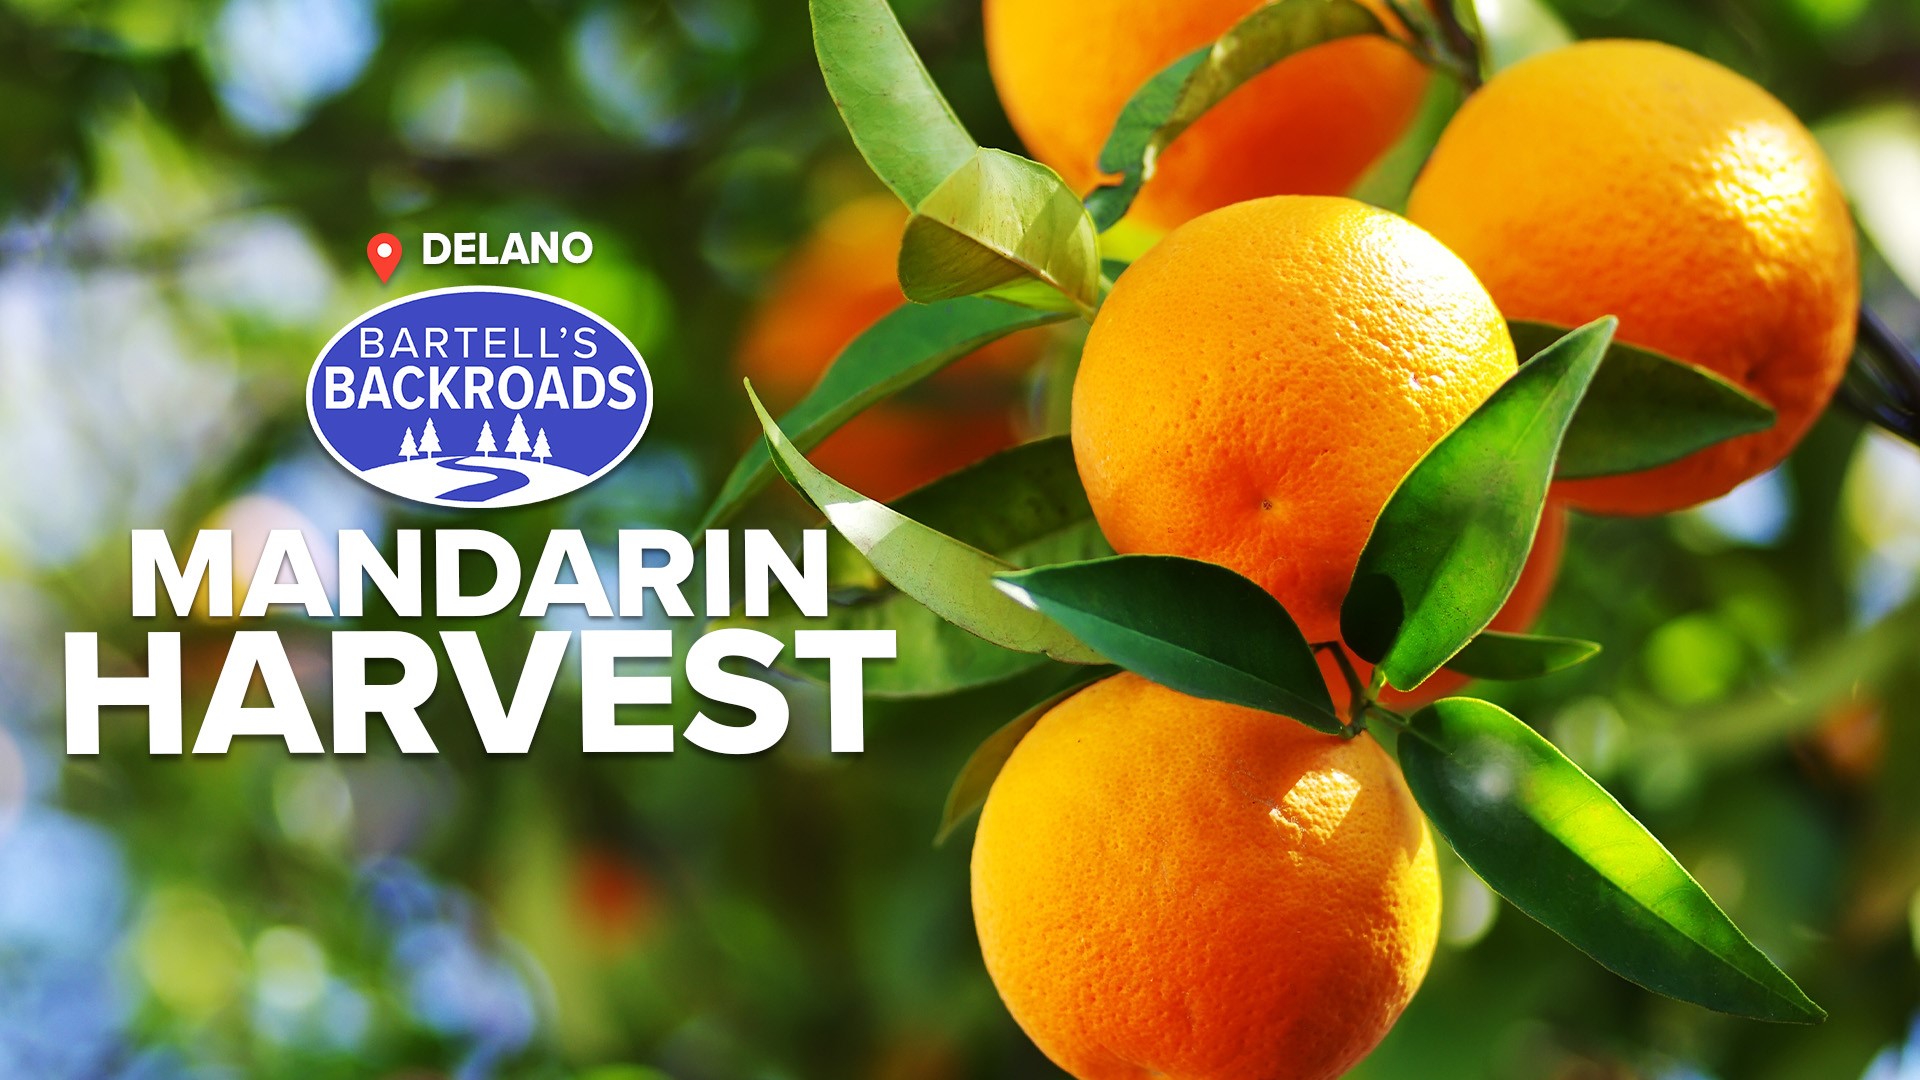 Thanks to a holiday story, mandarins have become a traditional Christmas stocking stuffer.  This year, billions of the tiny oranges will come from California.